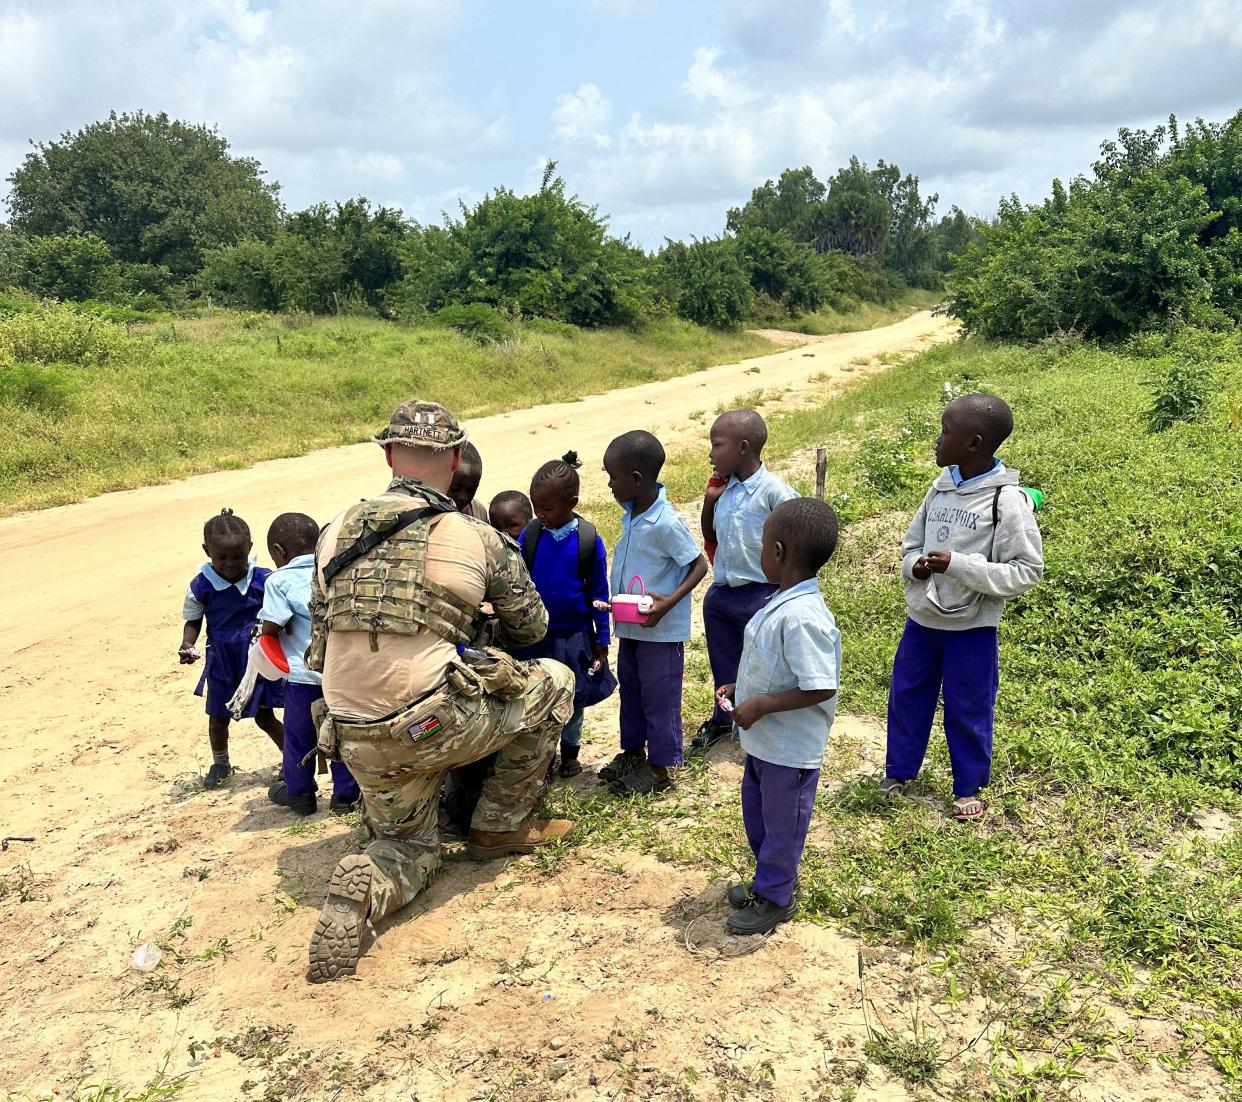 A member of the Indiana National Guard gives out sweets to local children near Camp Simba, Kenya, in 2023 as part of Operation Enduring Freedom.